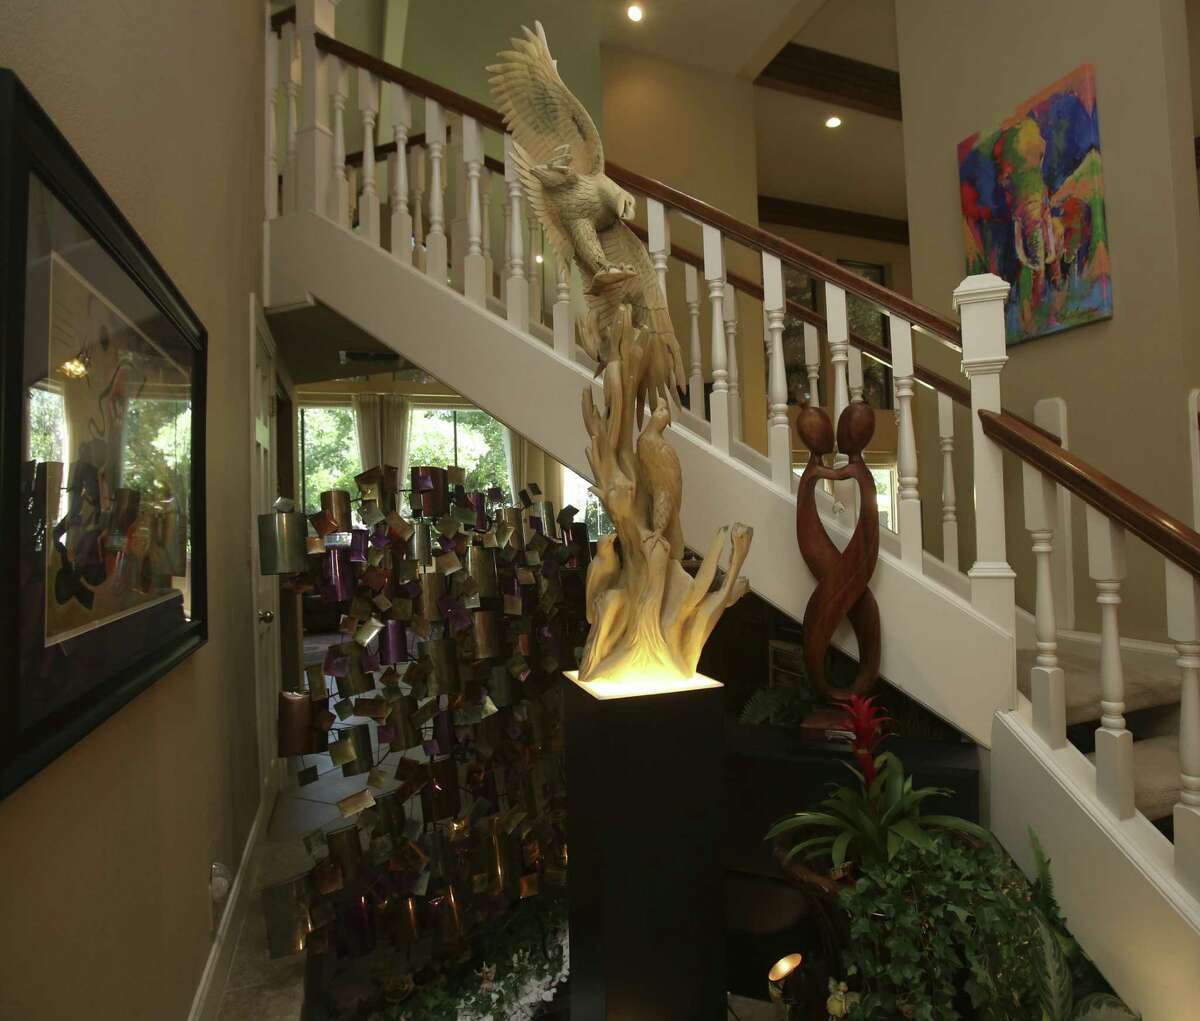 Sculptures and paintings decorate the entryway in the home of Linda and Jim Beard.